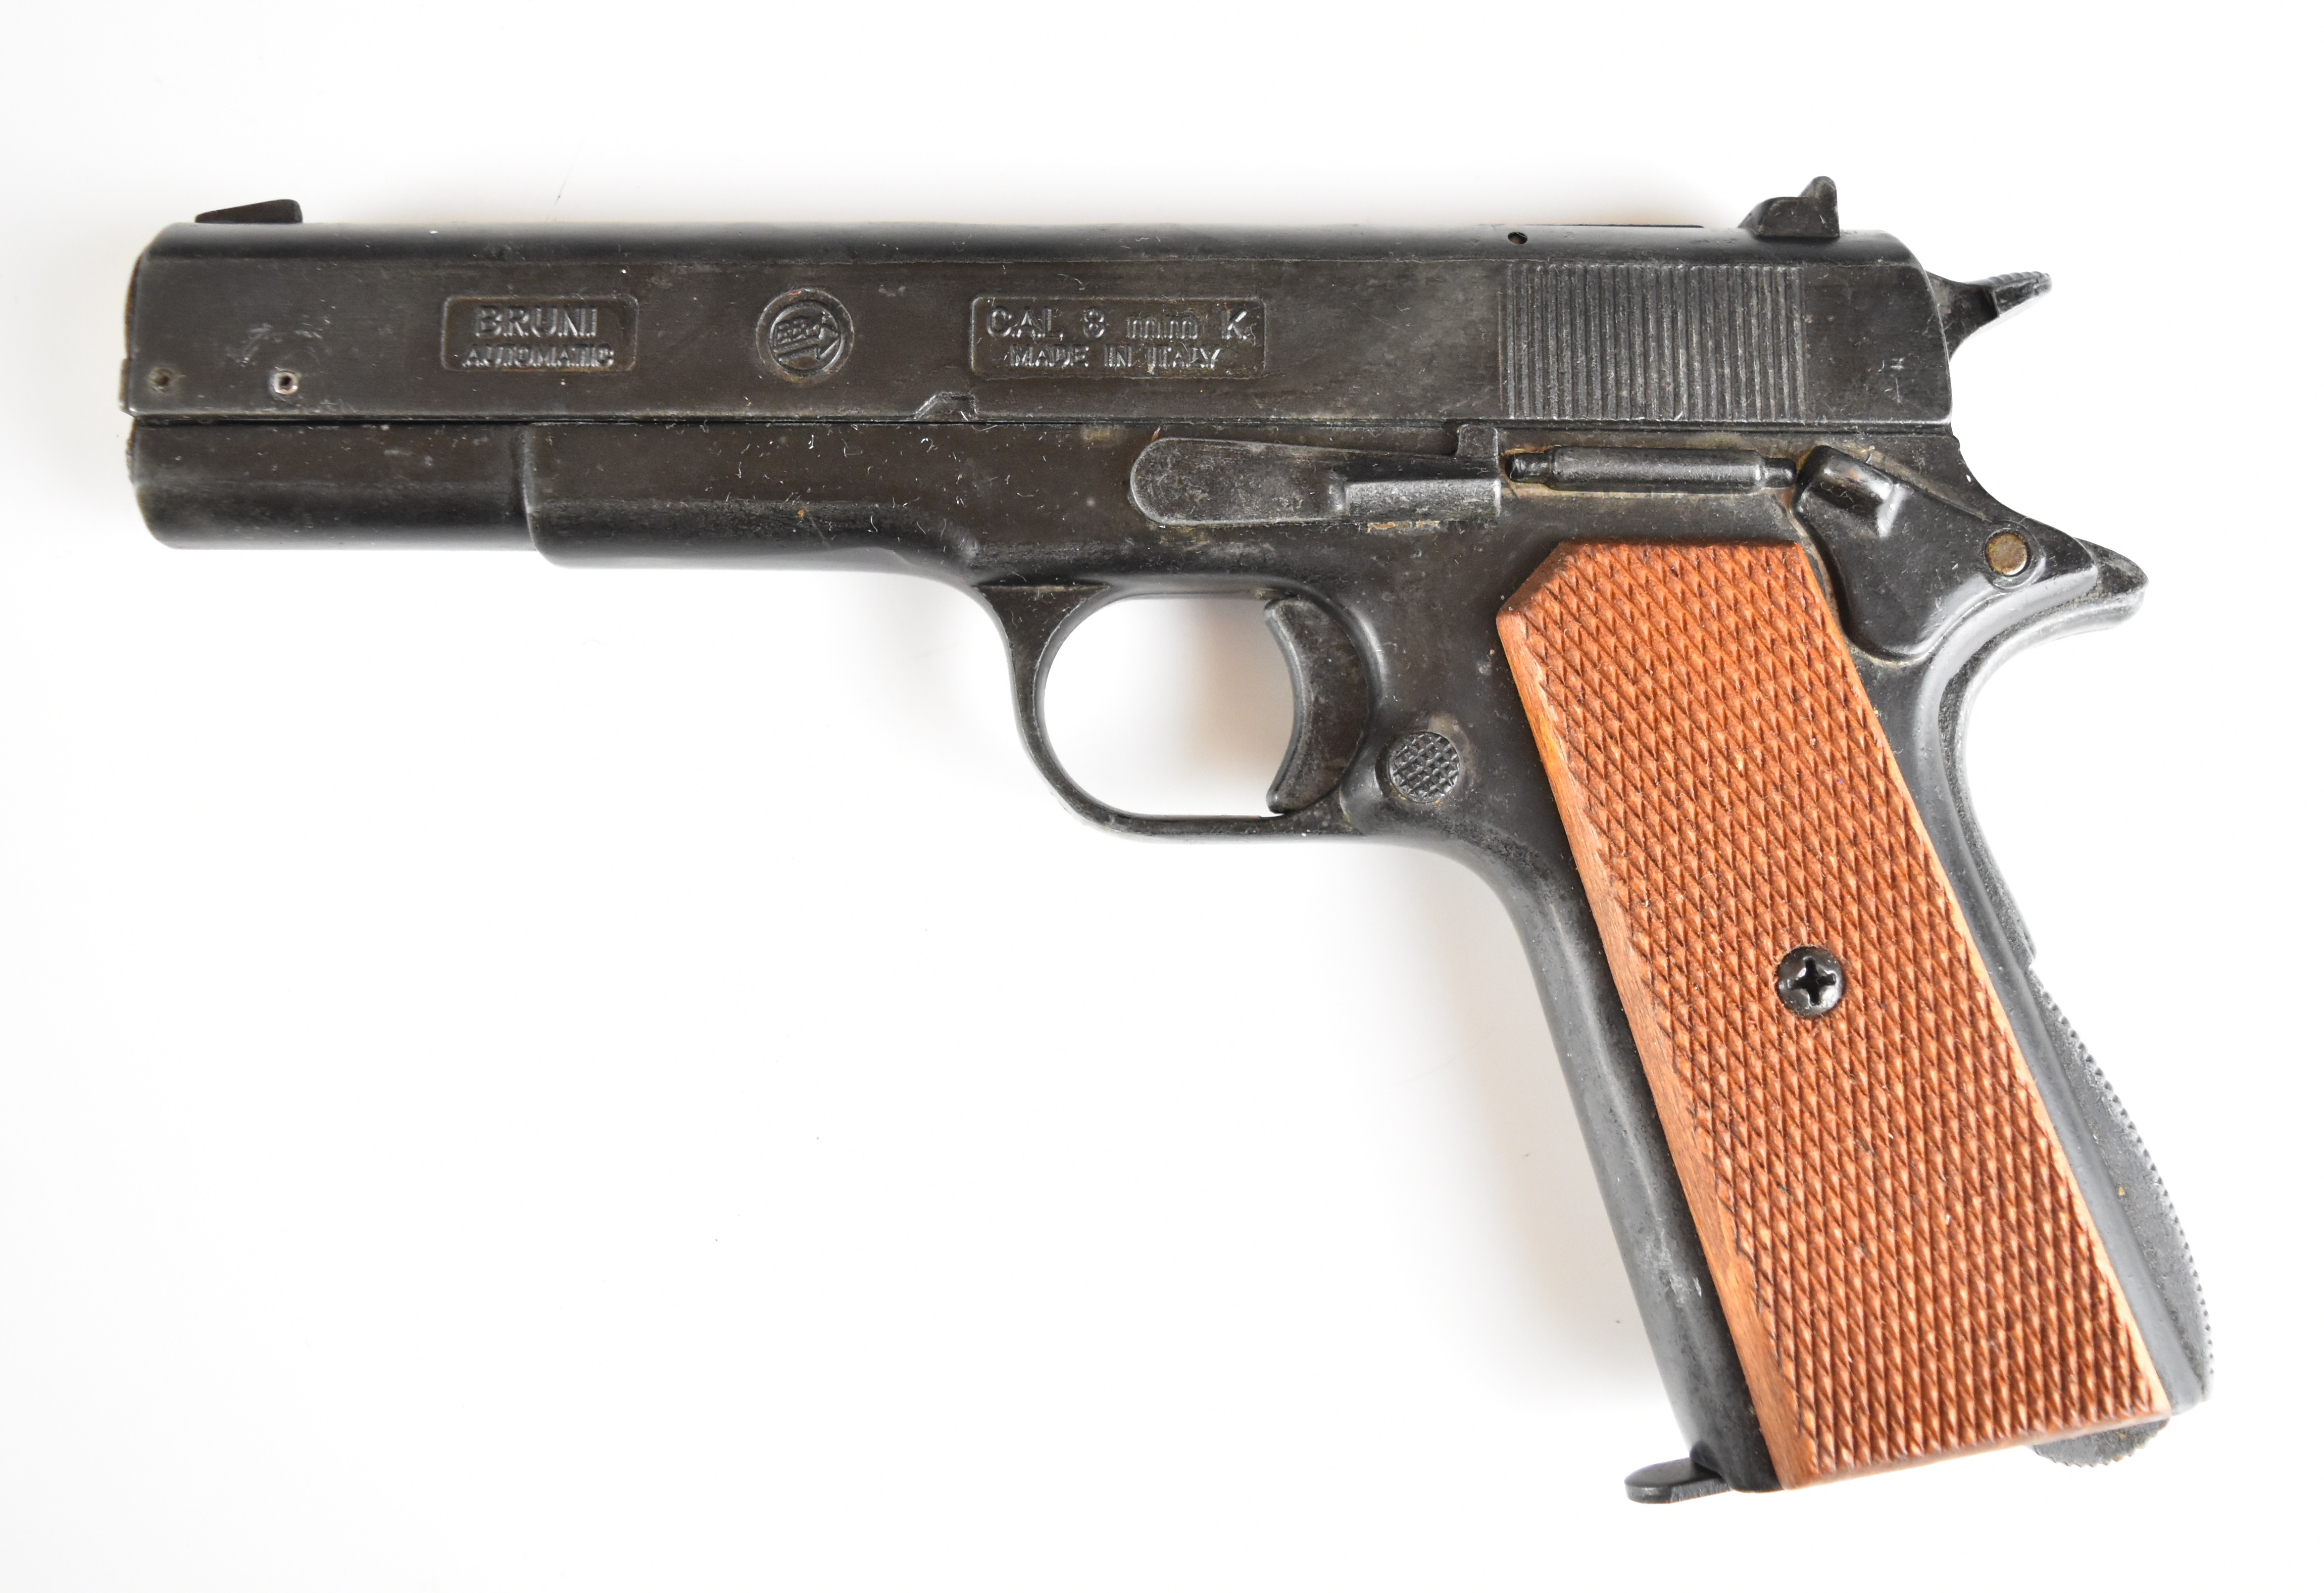 BBM Bruni 8mm blank firing pistol with chequered wooden grips, in original fitted box. - Image 3 of 14